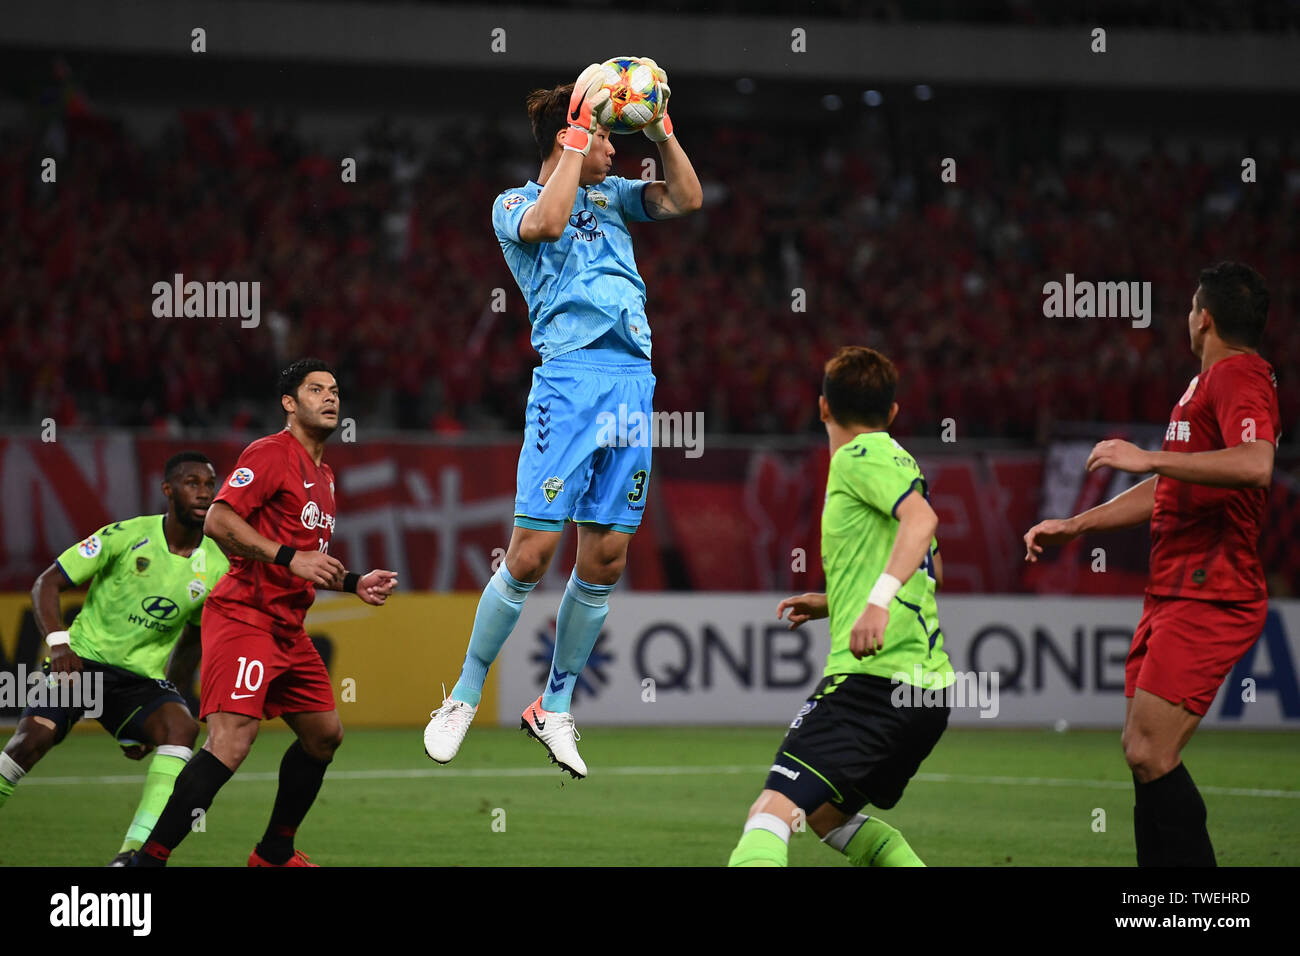 Song Bum-keun, top, of South Korea's Jeonbuk Hyundai Motors FC passes the  ball against players of Shanghai SIPG in the eighth-final match during the  2019 AFC Champions League in Shanghai, China, 19